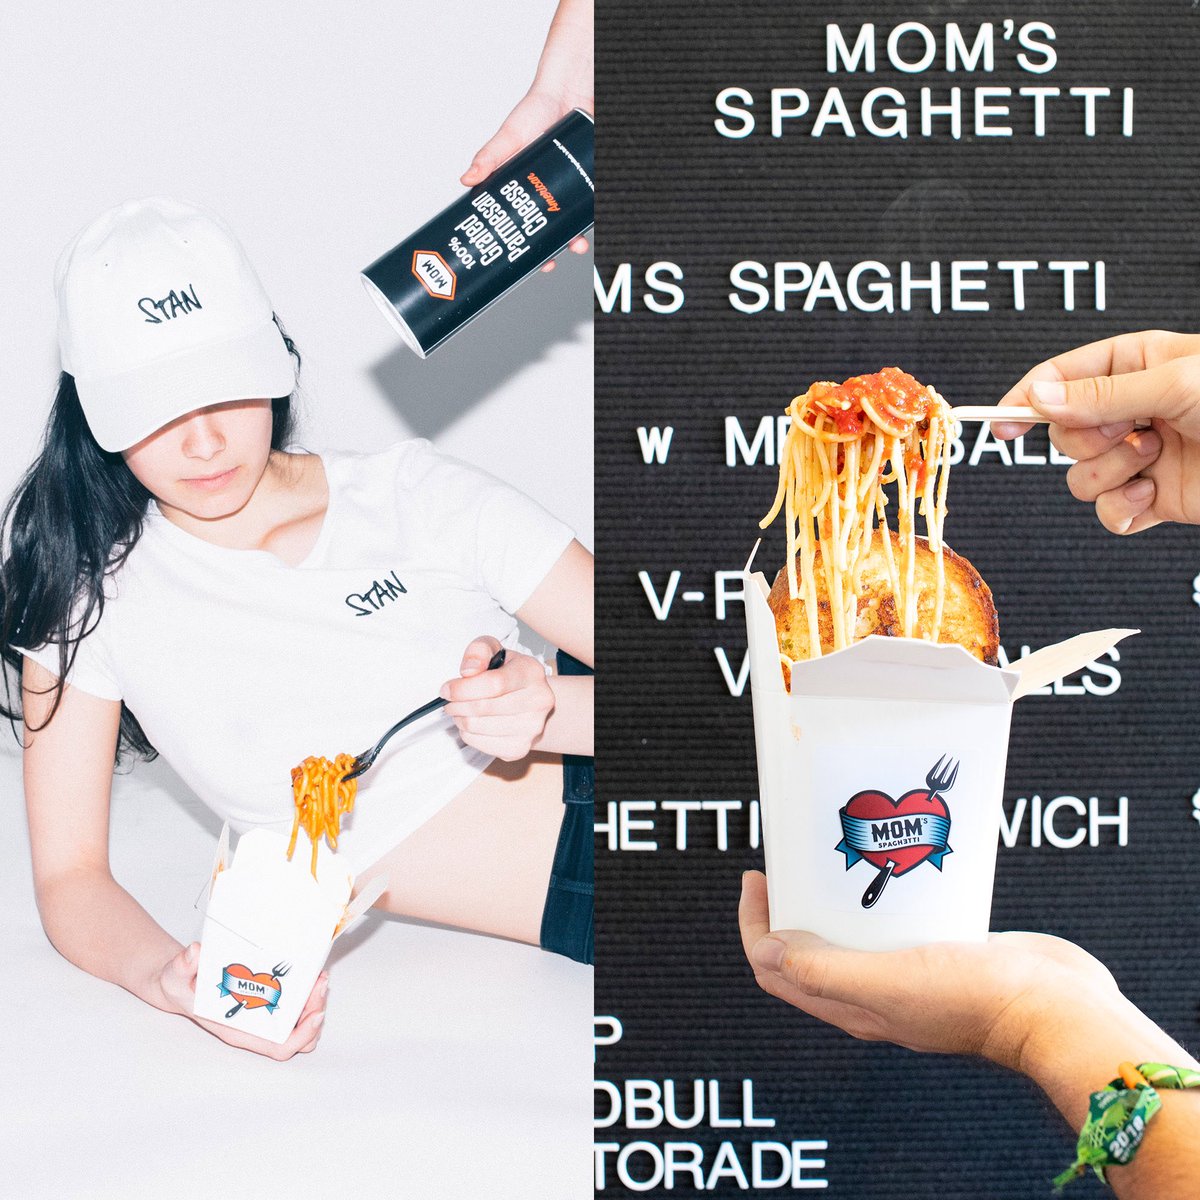 .@COACHELLA STANS - CATCH US ACROSS FROM THE DO LAB STAGE #MOMSPAGHETTI + #STAN MERCH https://t.co/0A8izndred